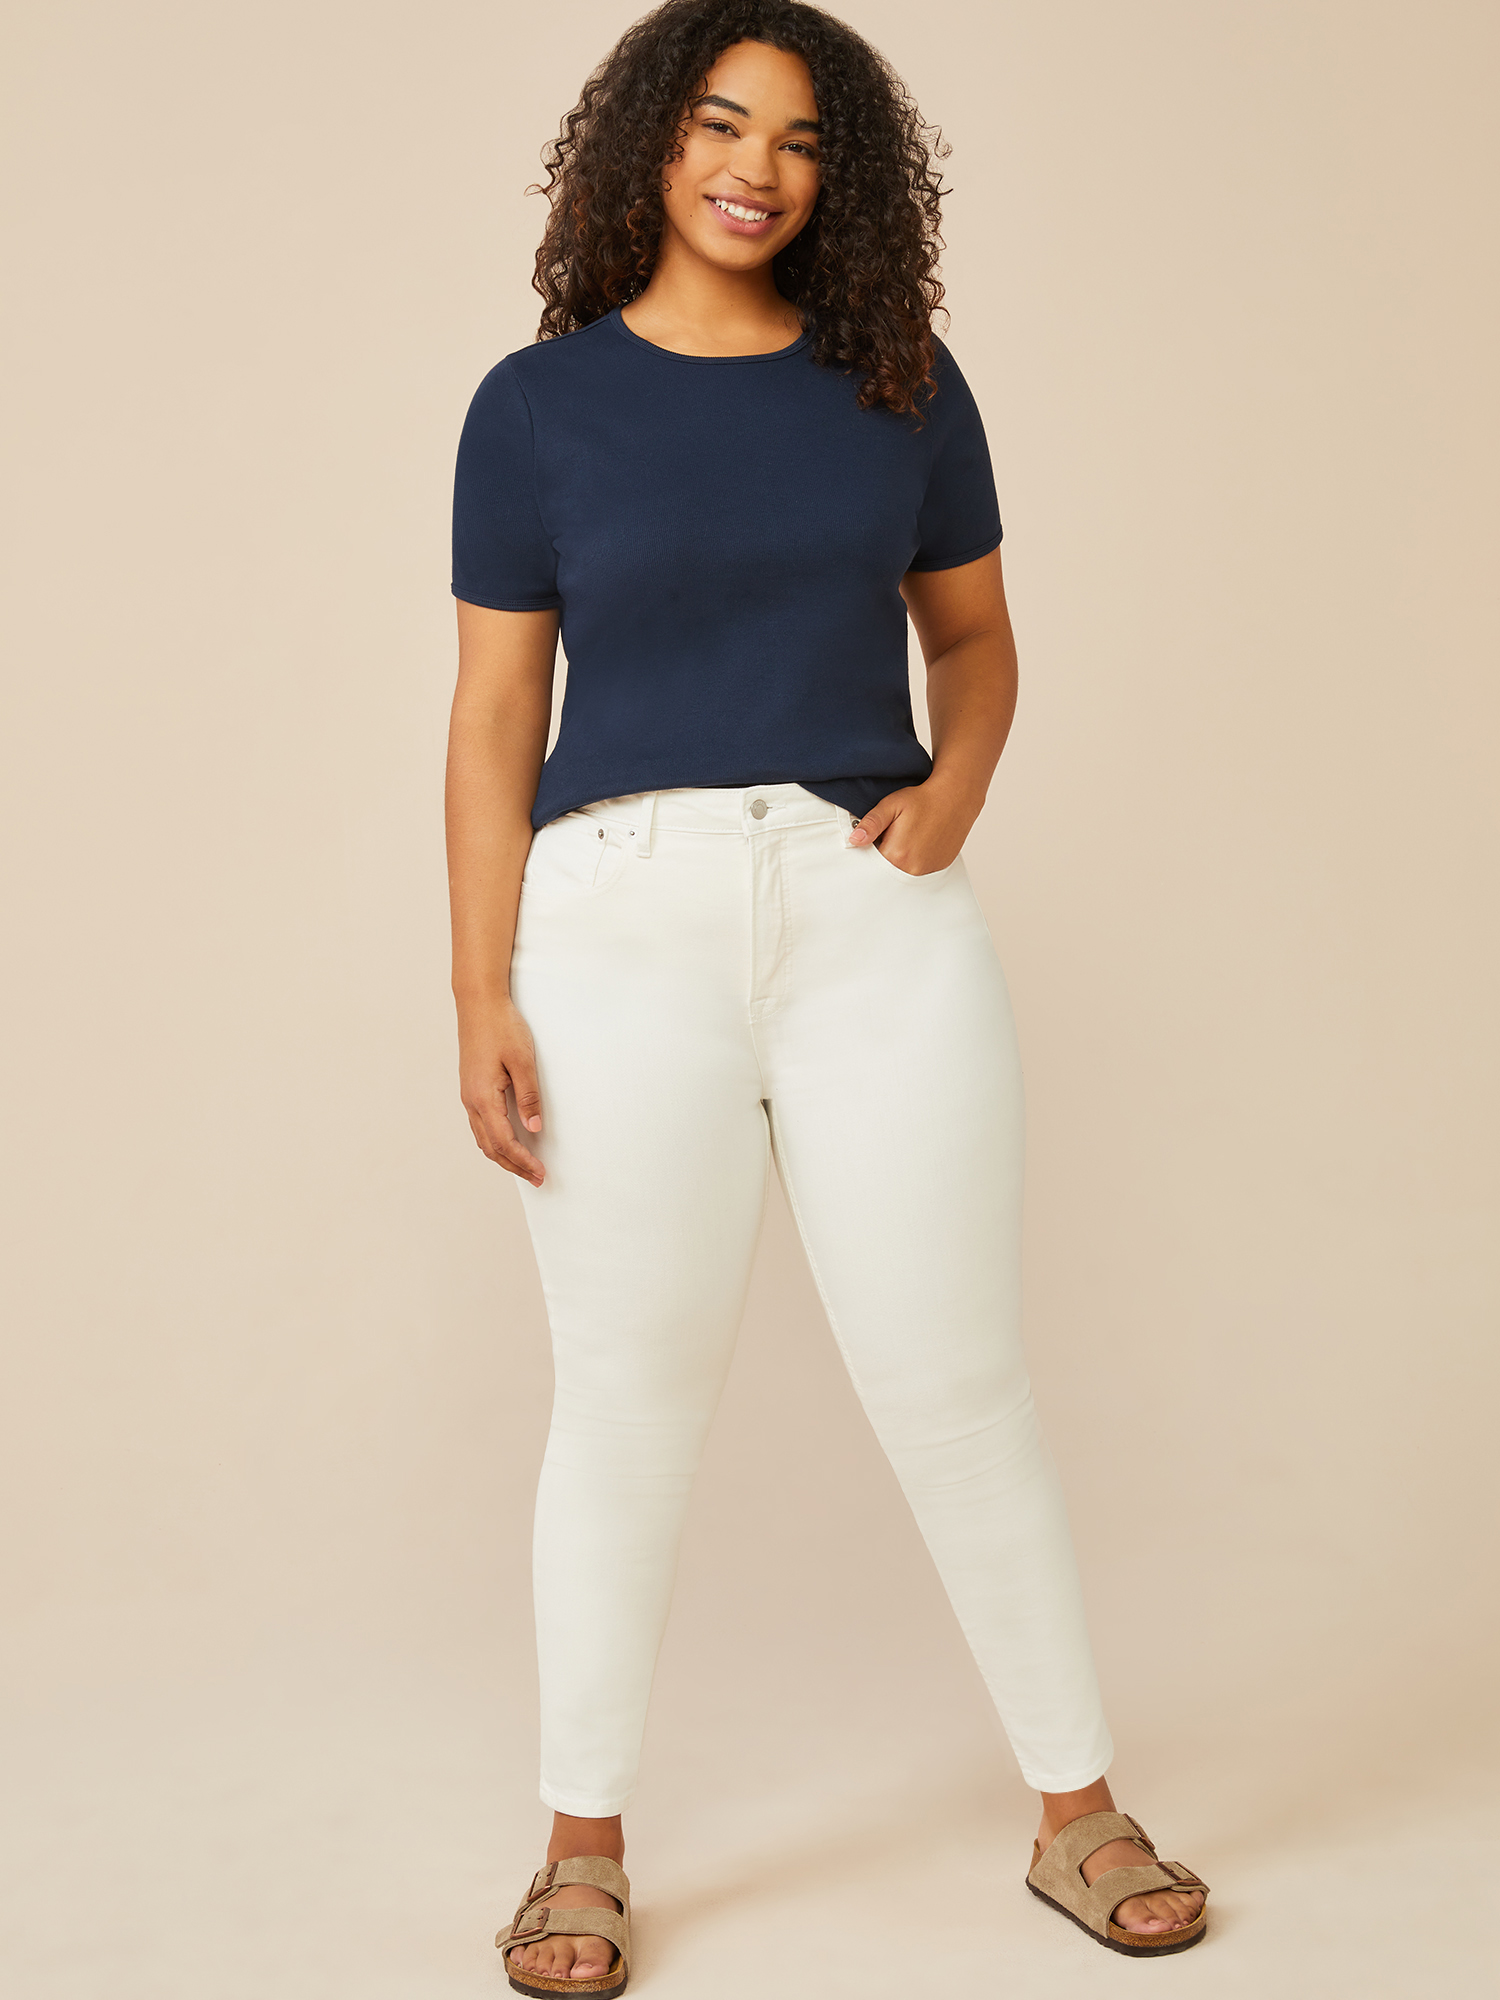 Free Assembly Women's High Rise Skinny Jeans - image 2 of 5